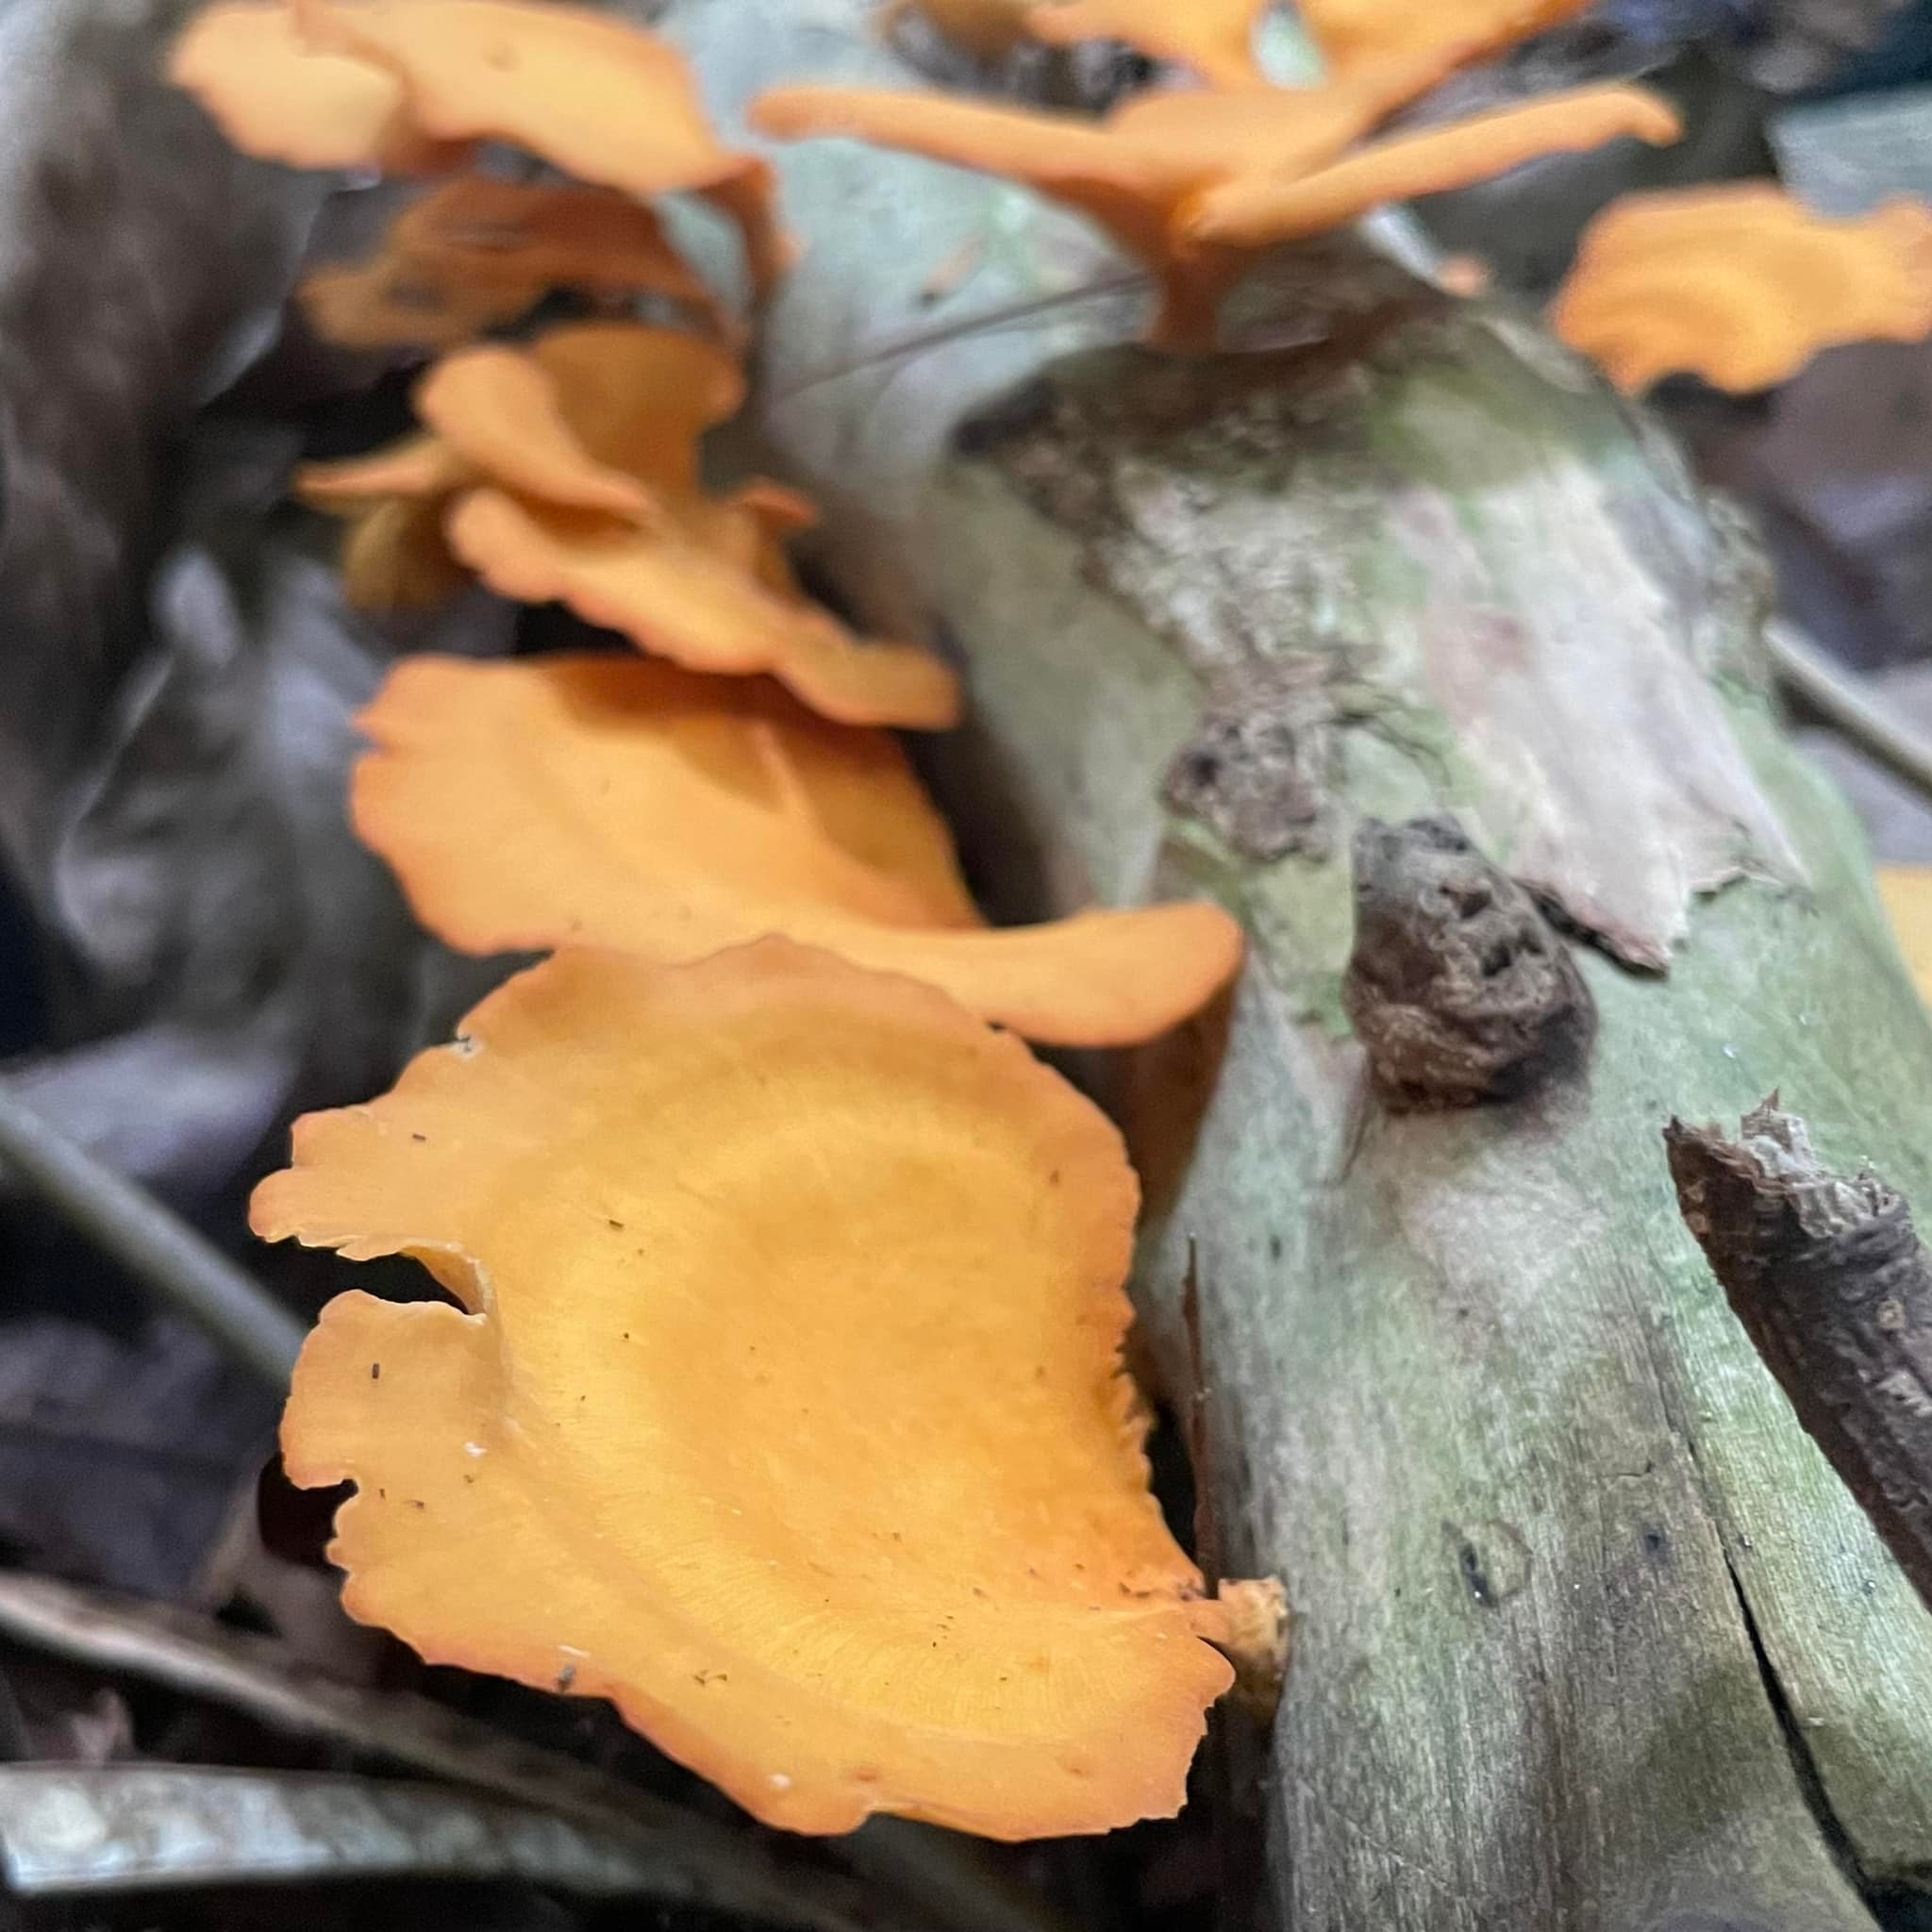 What is So Amazing About Fungi?